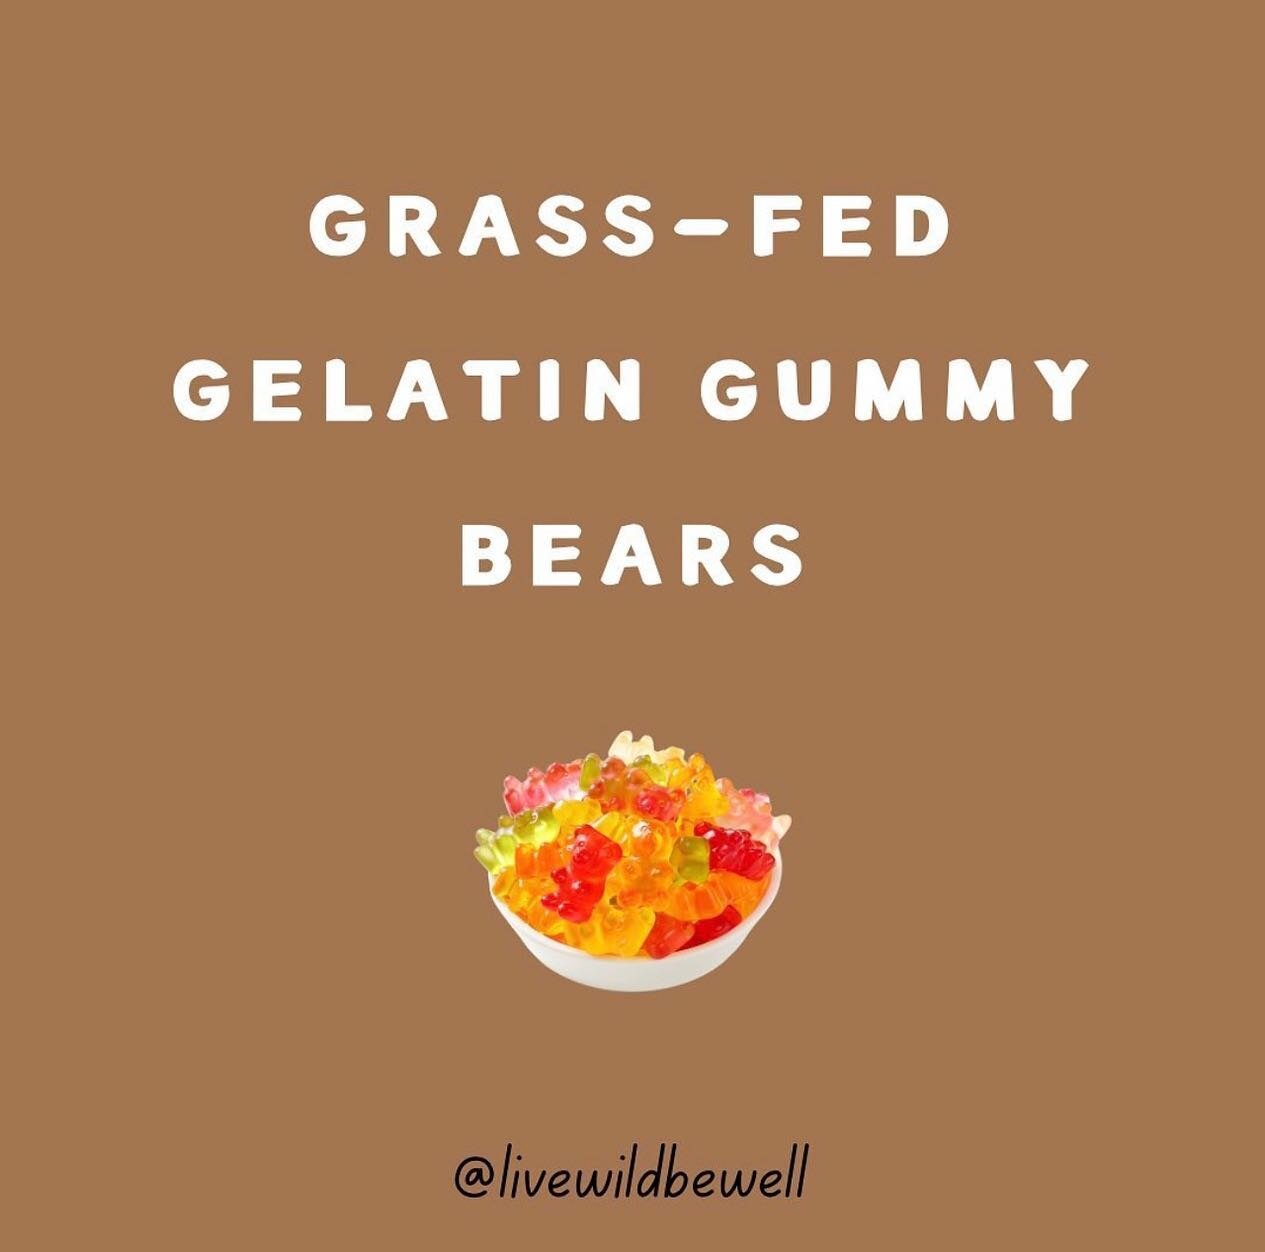 Looking to get more gelatin into your diet but don&rsquo;t like making bone broth? Well, I still think you should be making broth, but gummies are a great way to get in some gut-healing nutrients as well as enjoy a fun little treat. Gelatin contains 